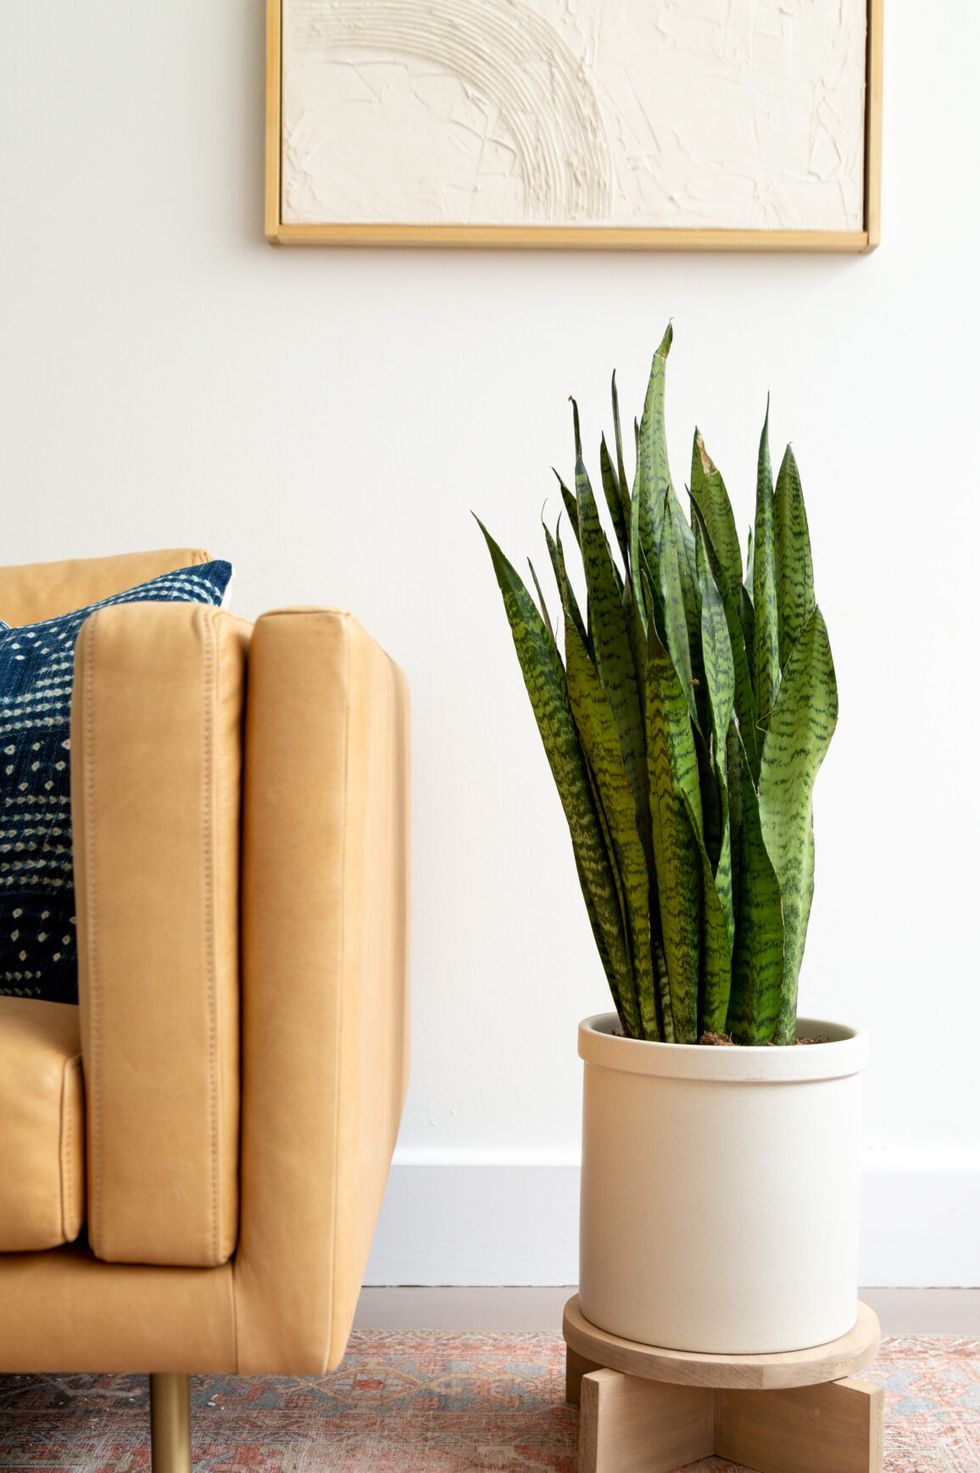 9 Step-by-Step DIY Projects for Making Stylish Home Accessories